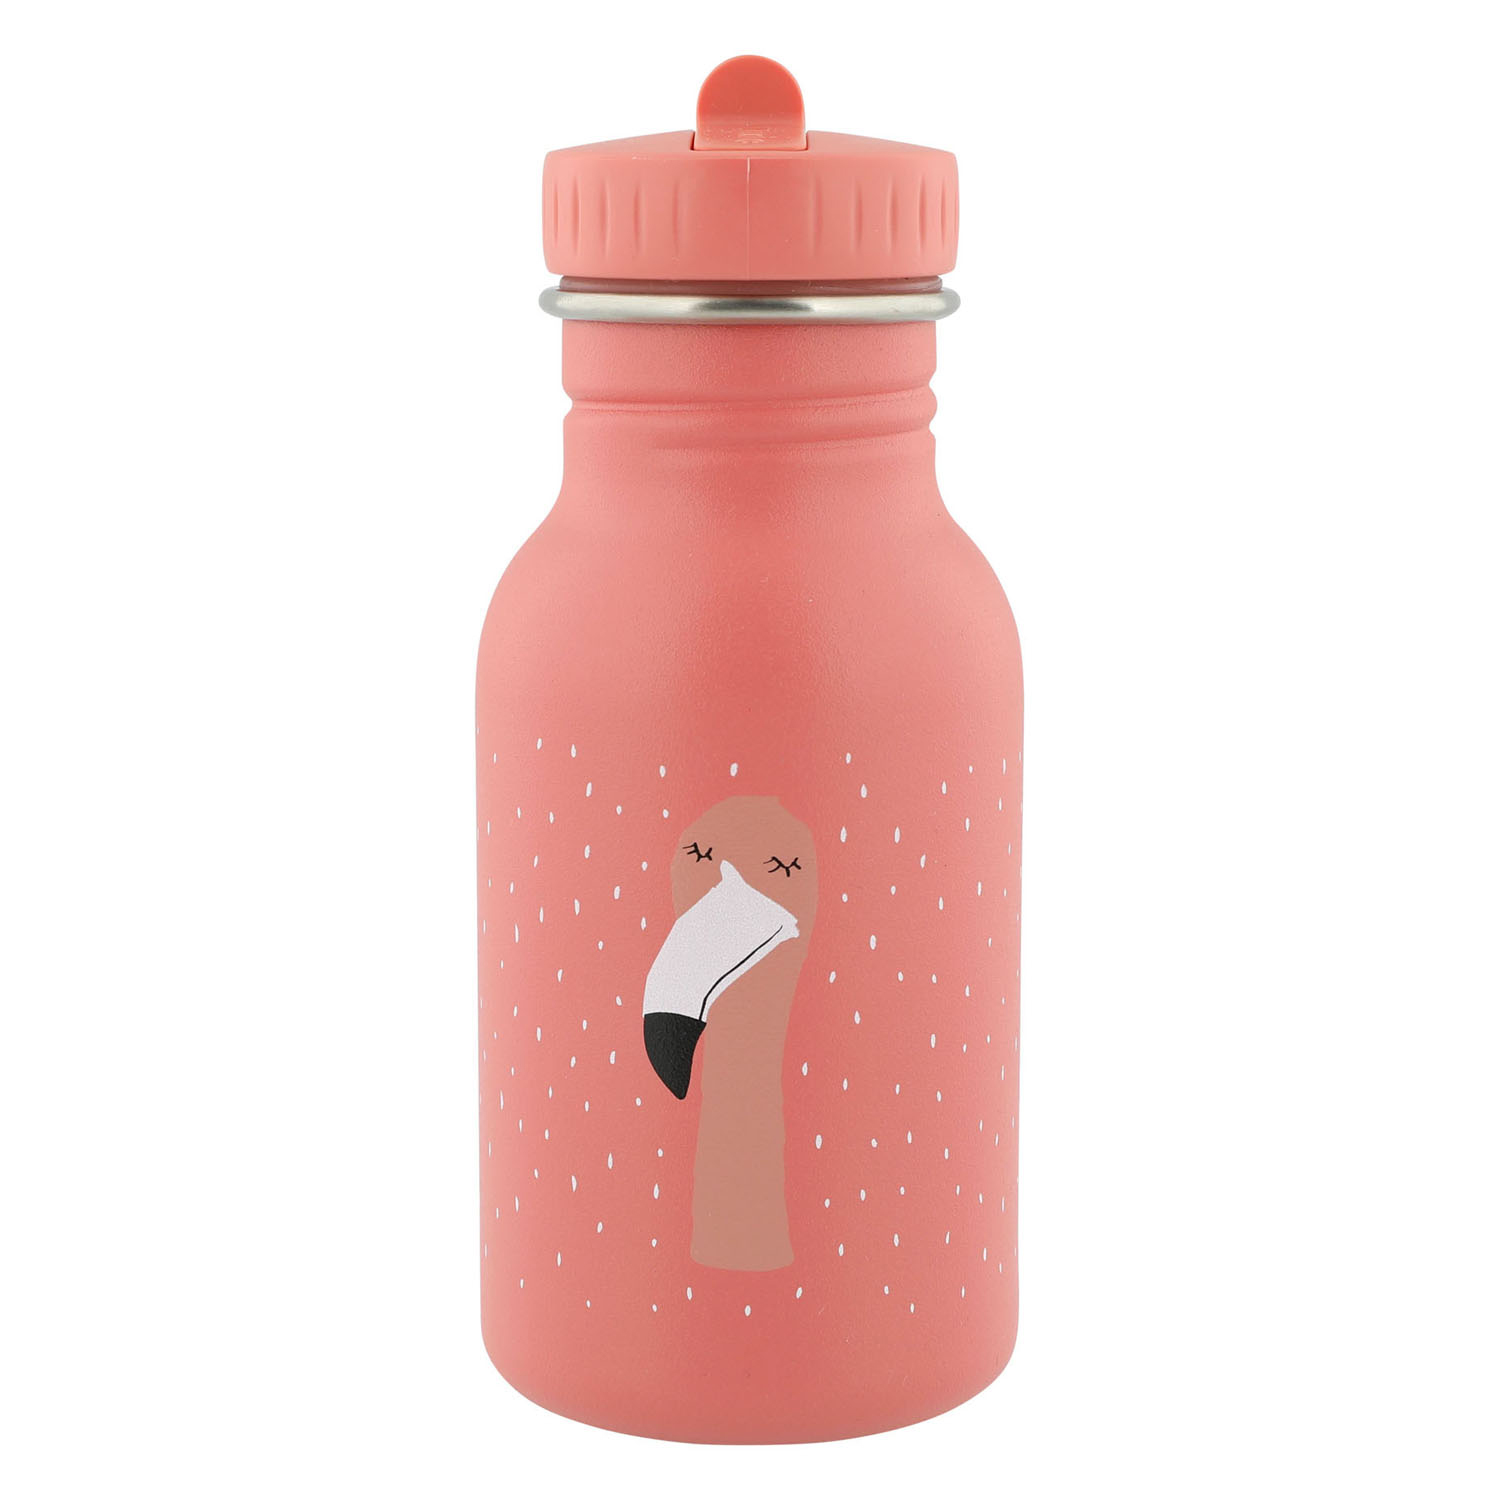 Gourde Trixie - Mme. Flamant rose, 350ml